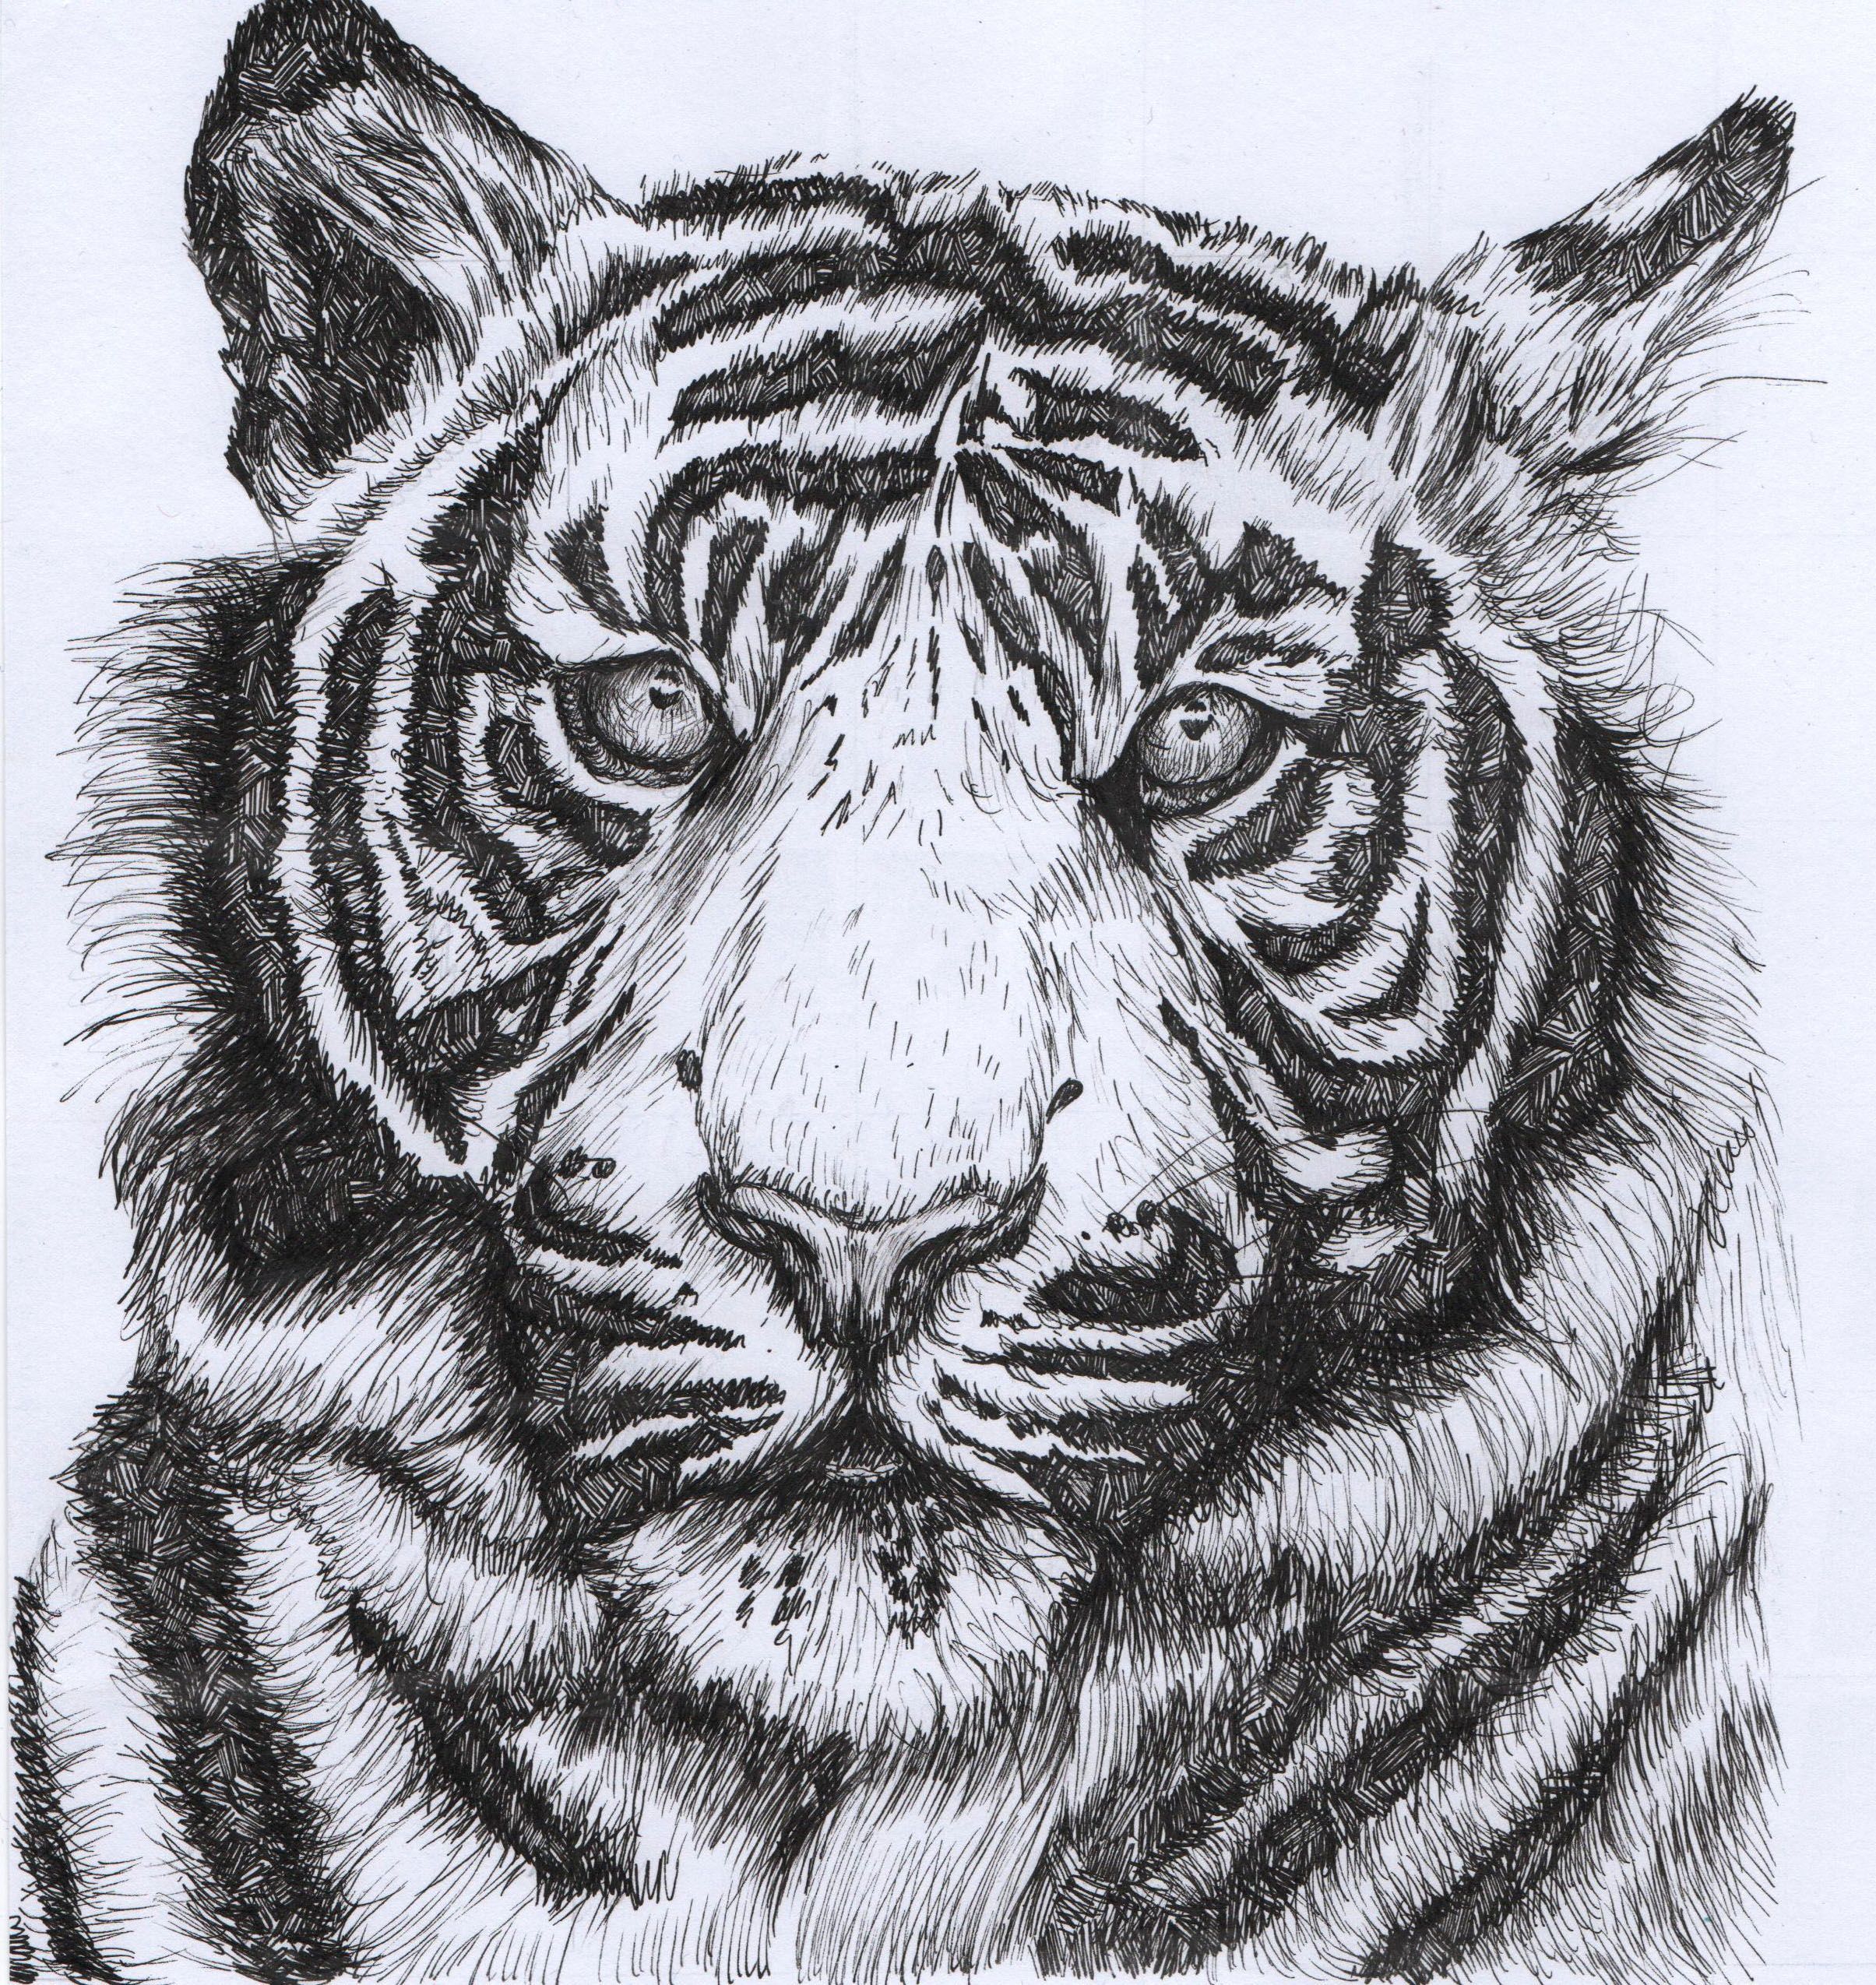  Tiger Sketch Drawing For Artists 